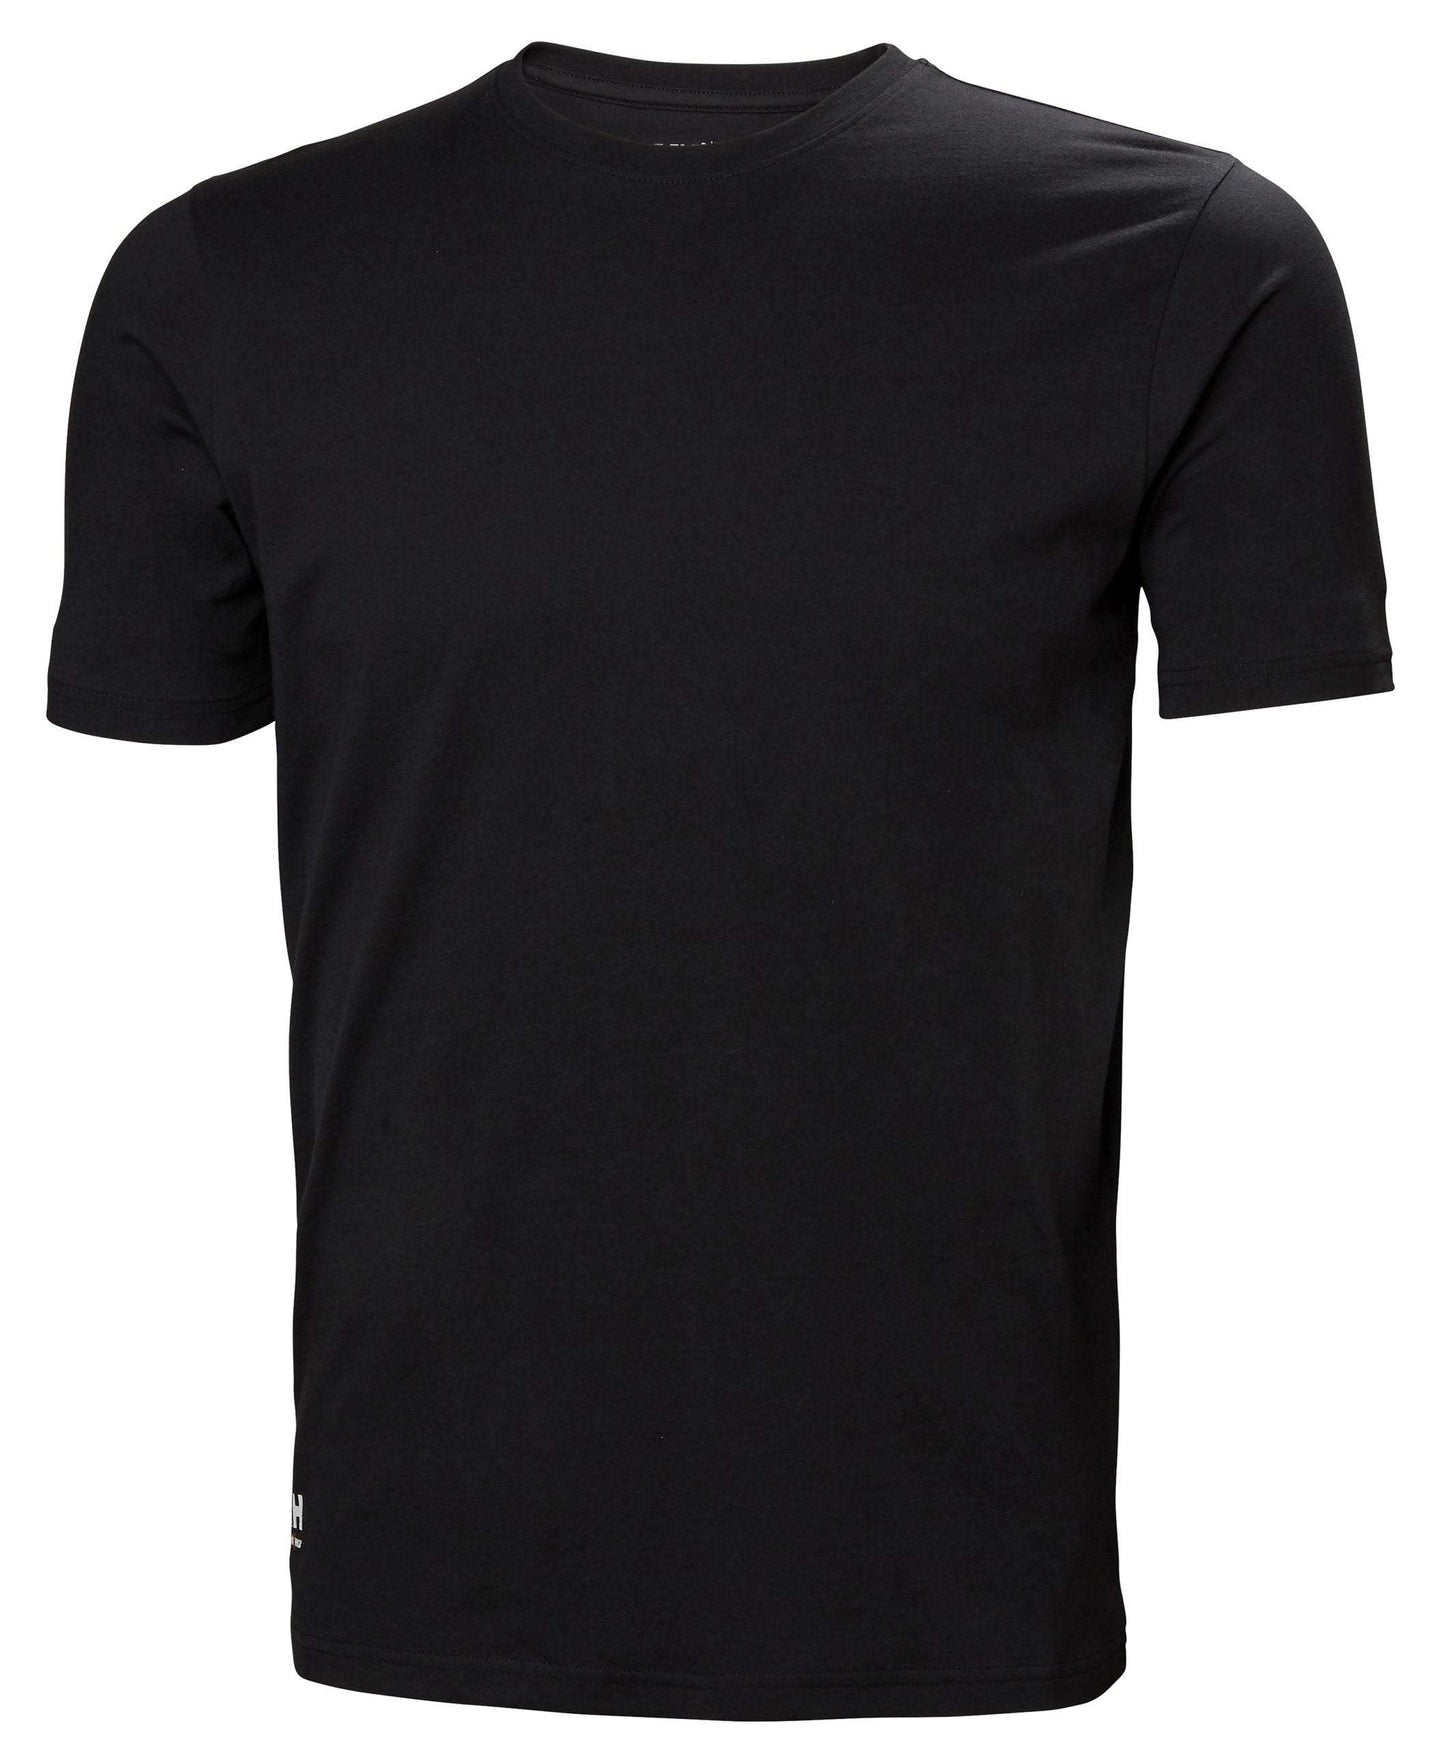 Helly Hansen Men's Classic Tshirt - The Luxury Promotional Gifts Company Limited